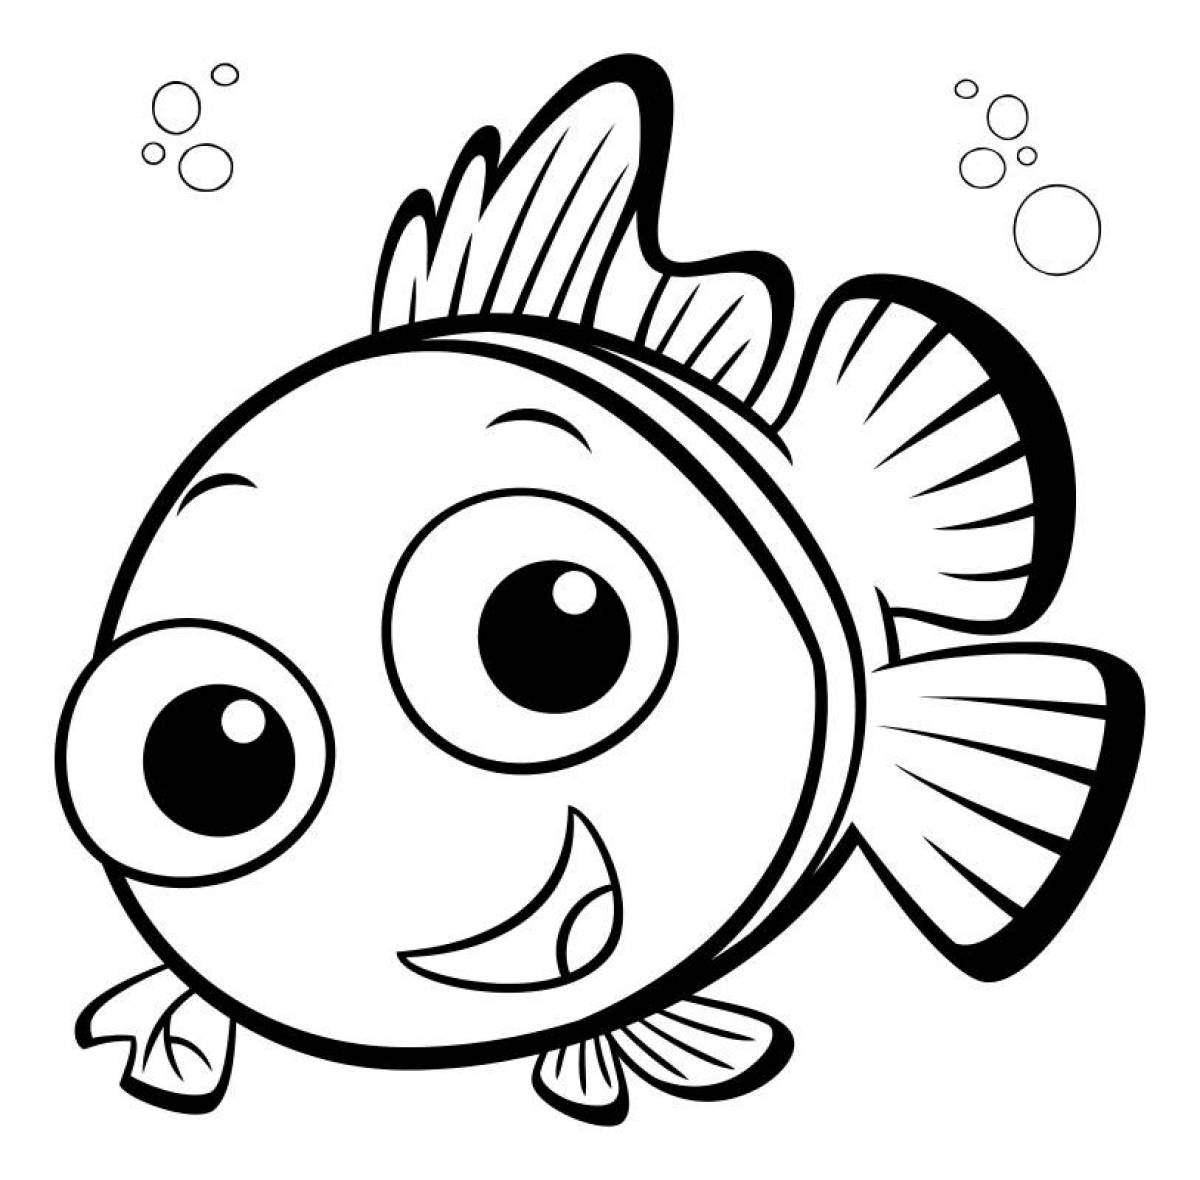 Fish for kids #1